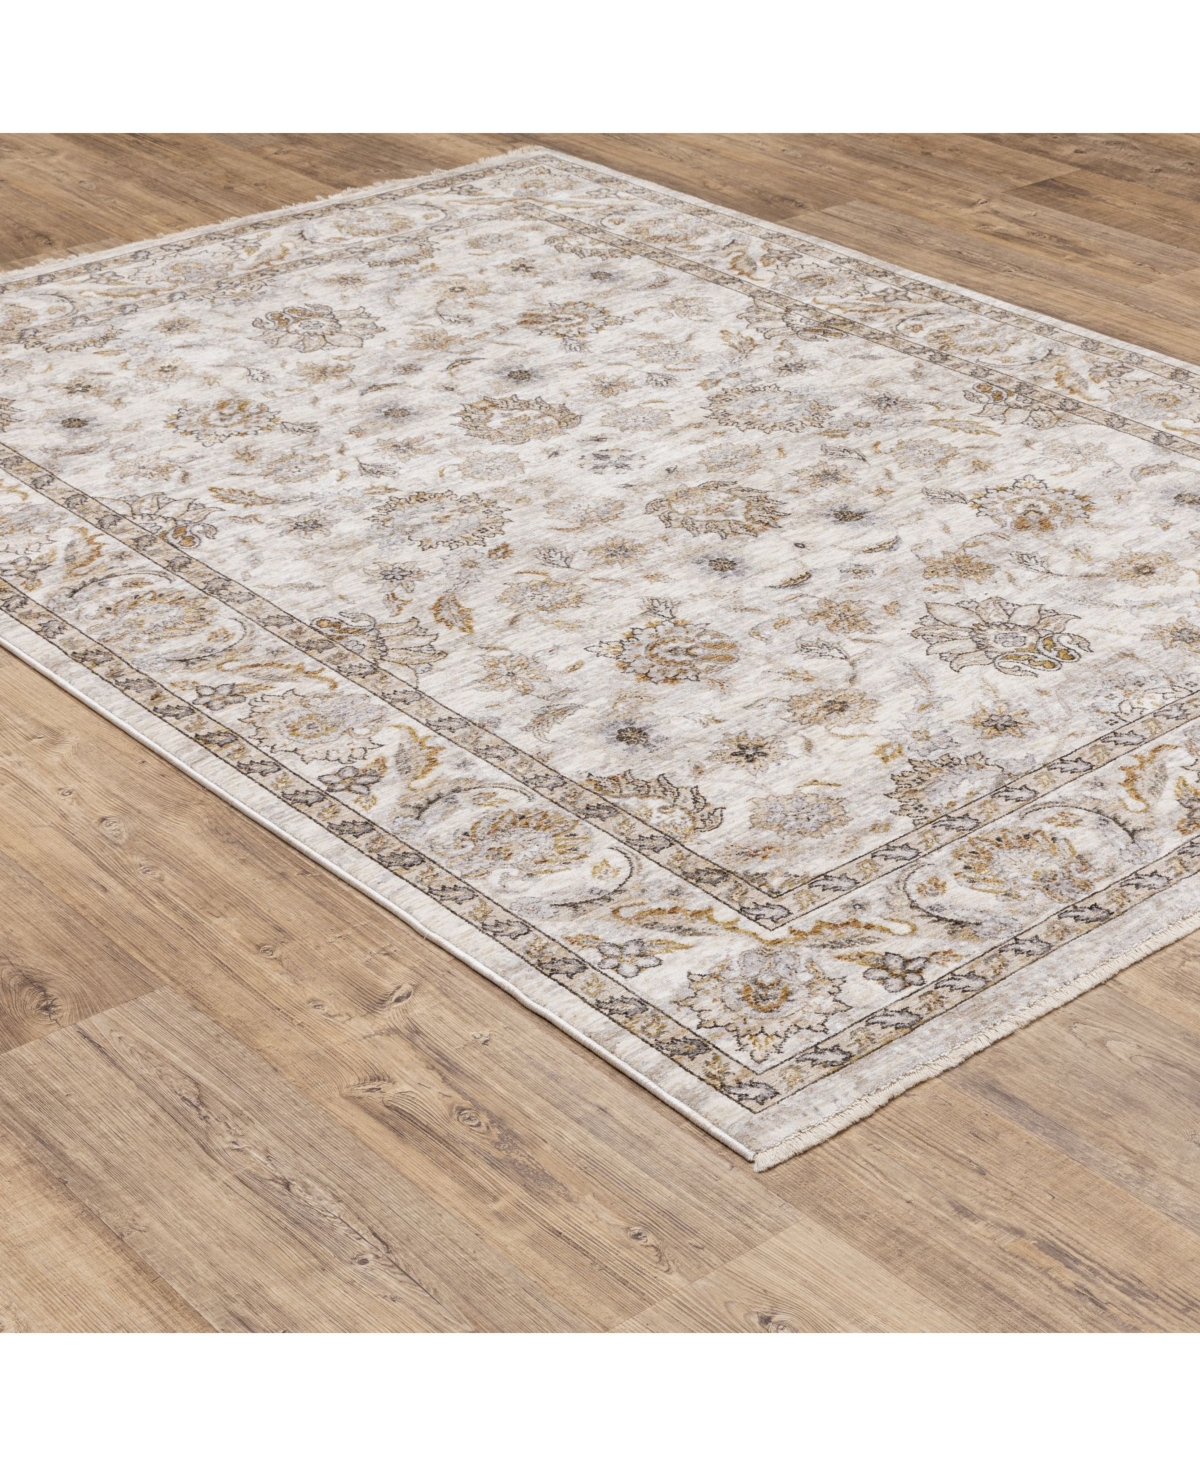 Shop Jhb Design S Kumar Kum03 Ivory And Gray 2' X 3' Area Rug In Ivory,gray